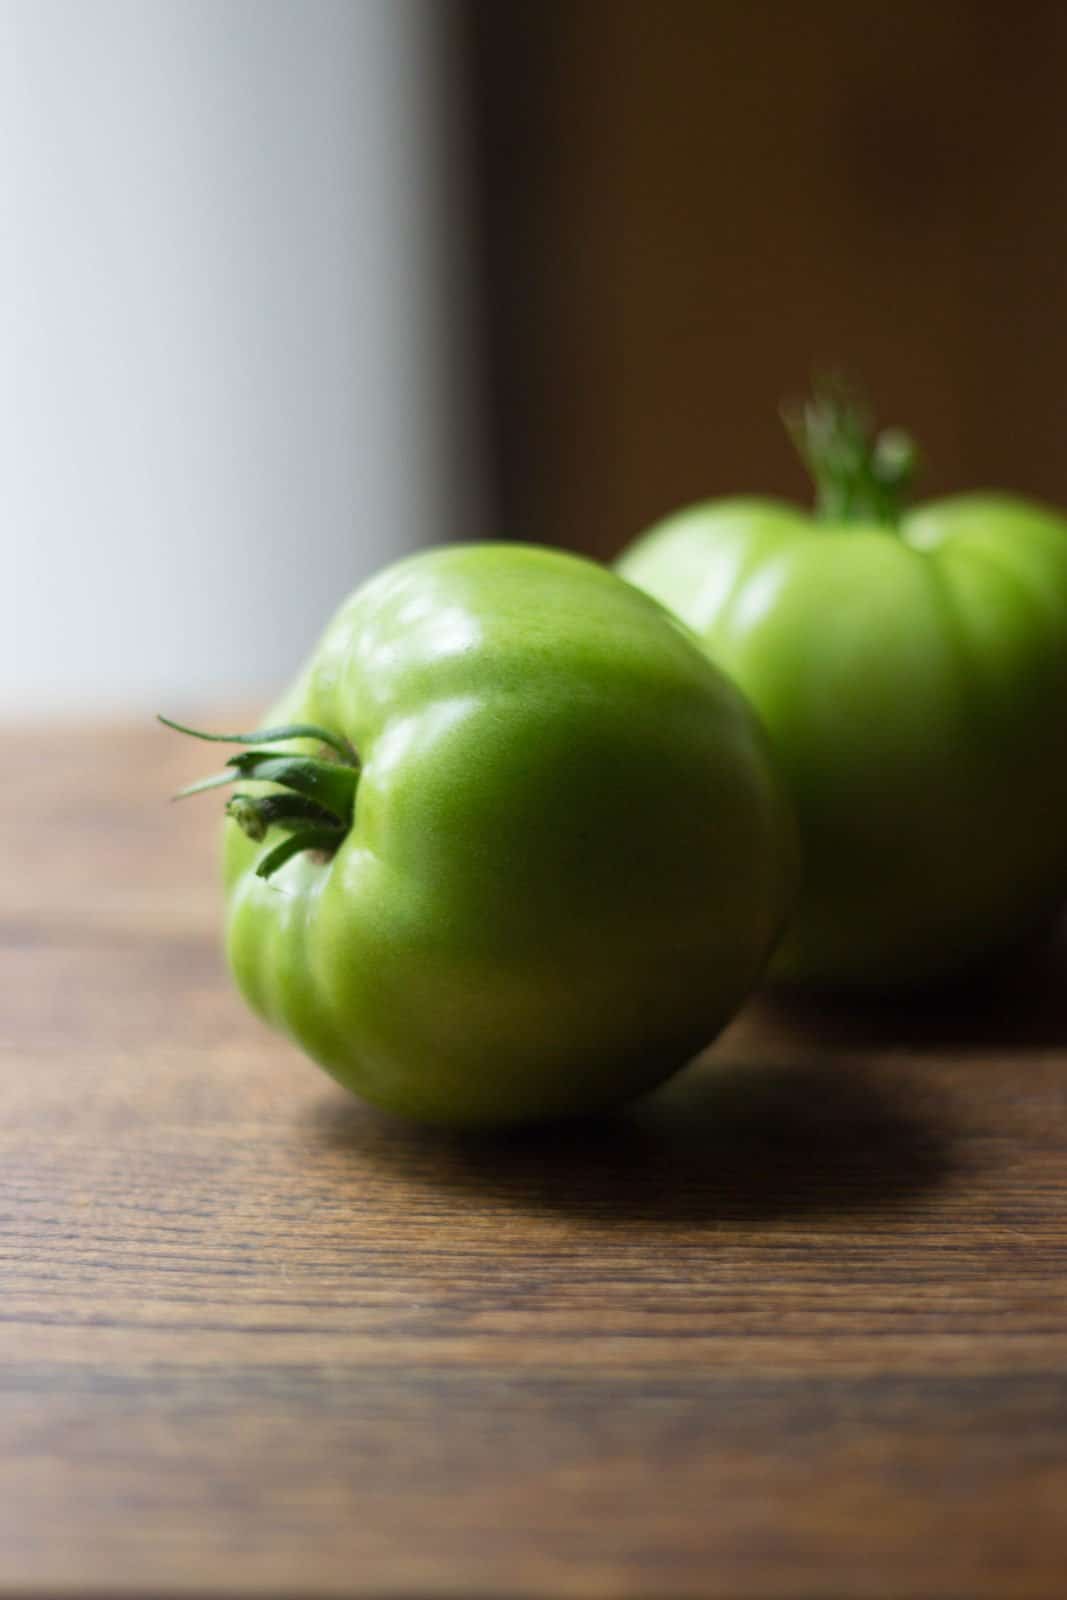 Green tomatoes on a board